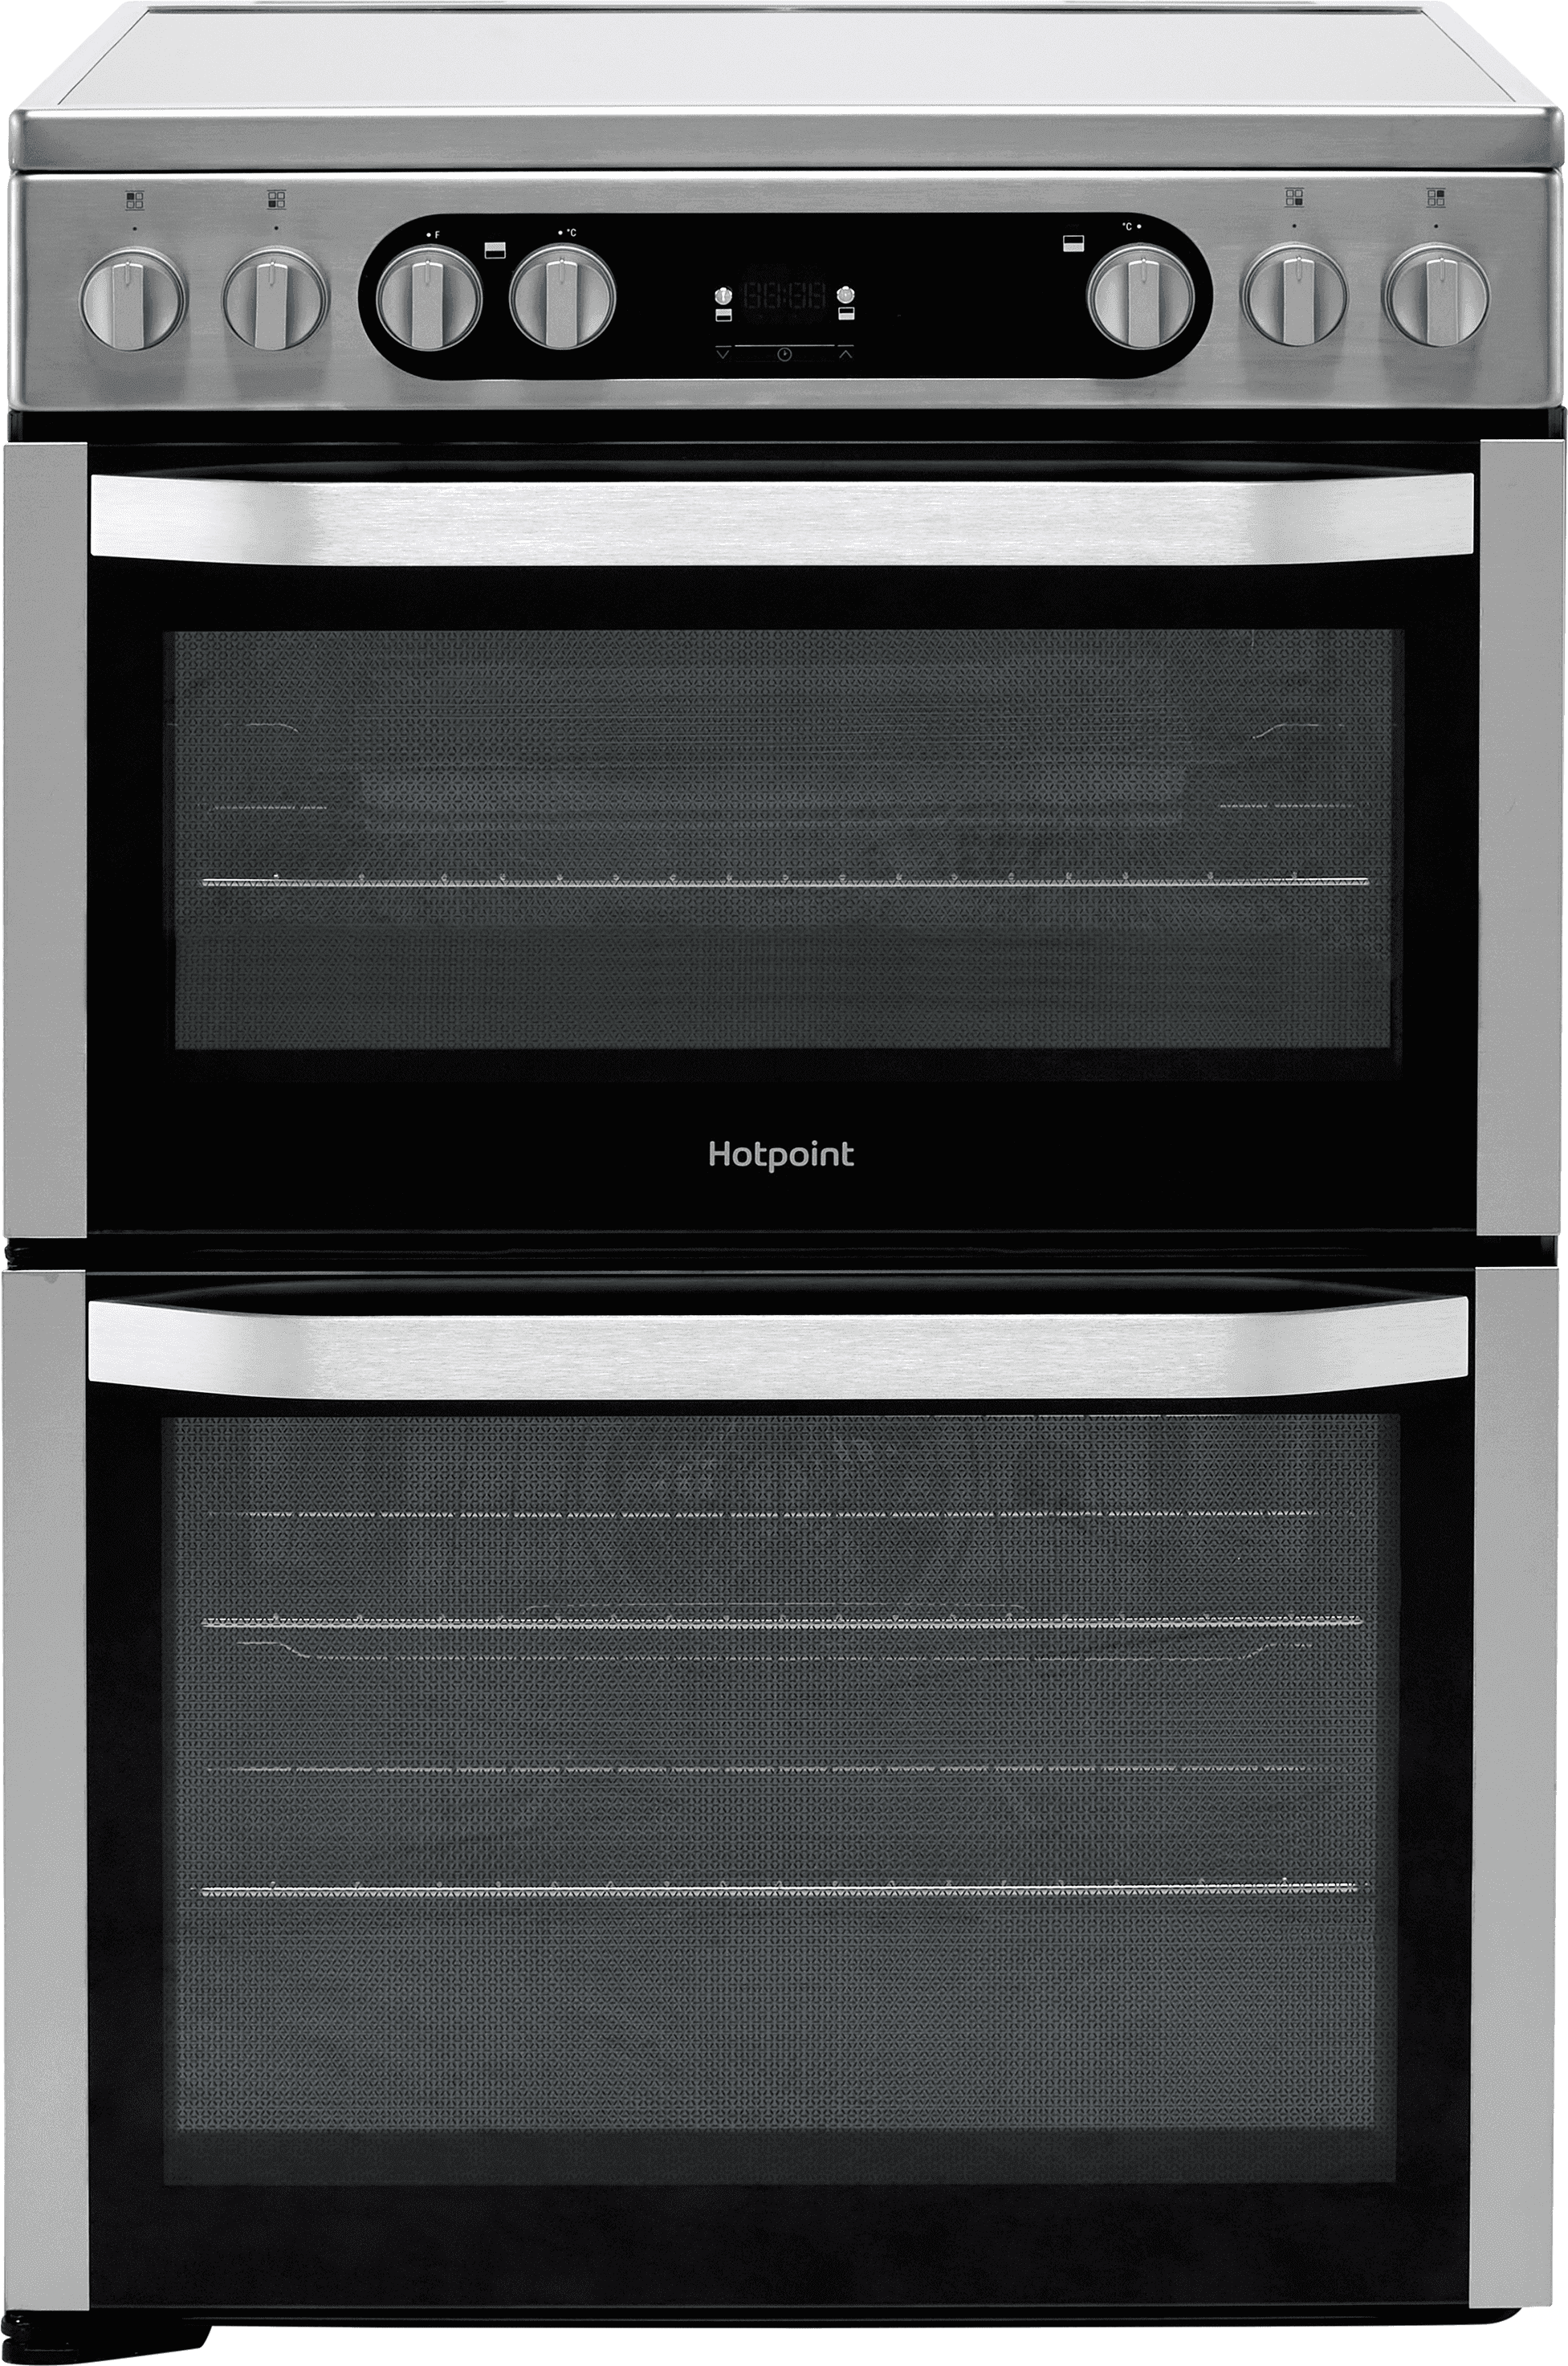 Hotpoint HDM67V9HCX/UK 60cm Electric Cooker with Ceramic Hob - Silver - A/A Rated, Silver